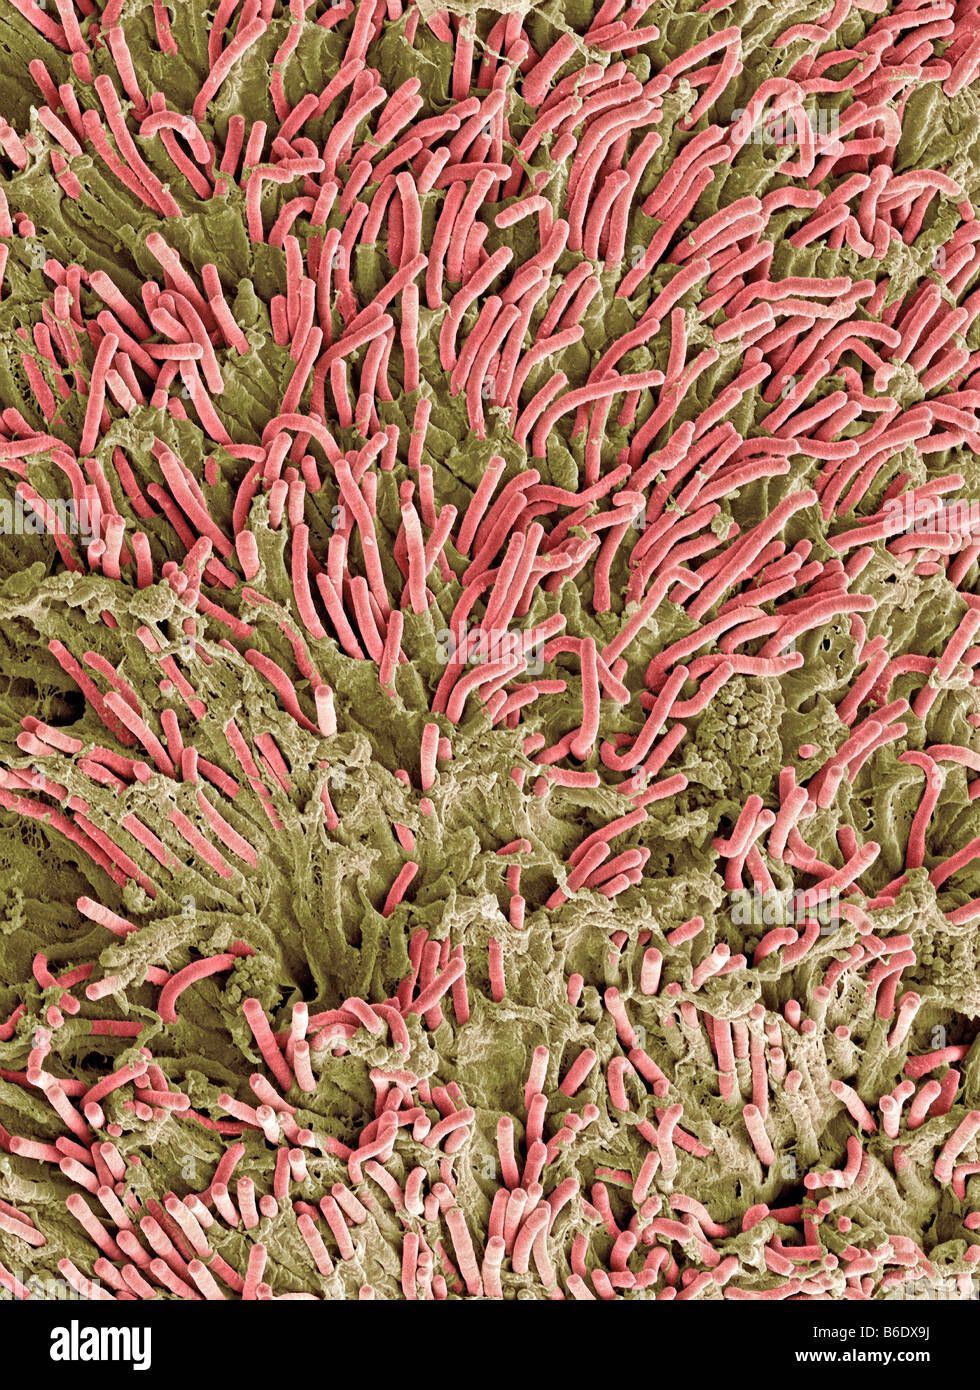 Dental plaque, coloured scanning electronmicrograph (SEM). Plaque consists of a film ofbacteria. Stock Photo